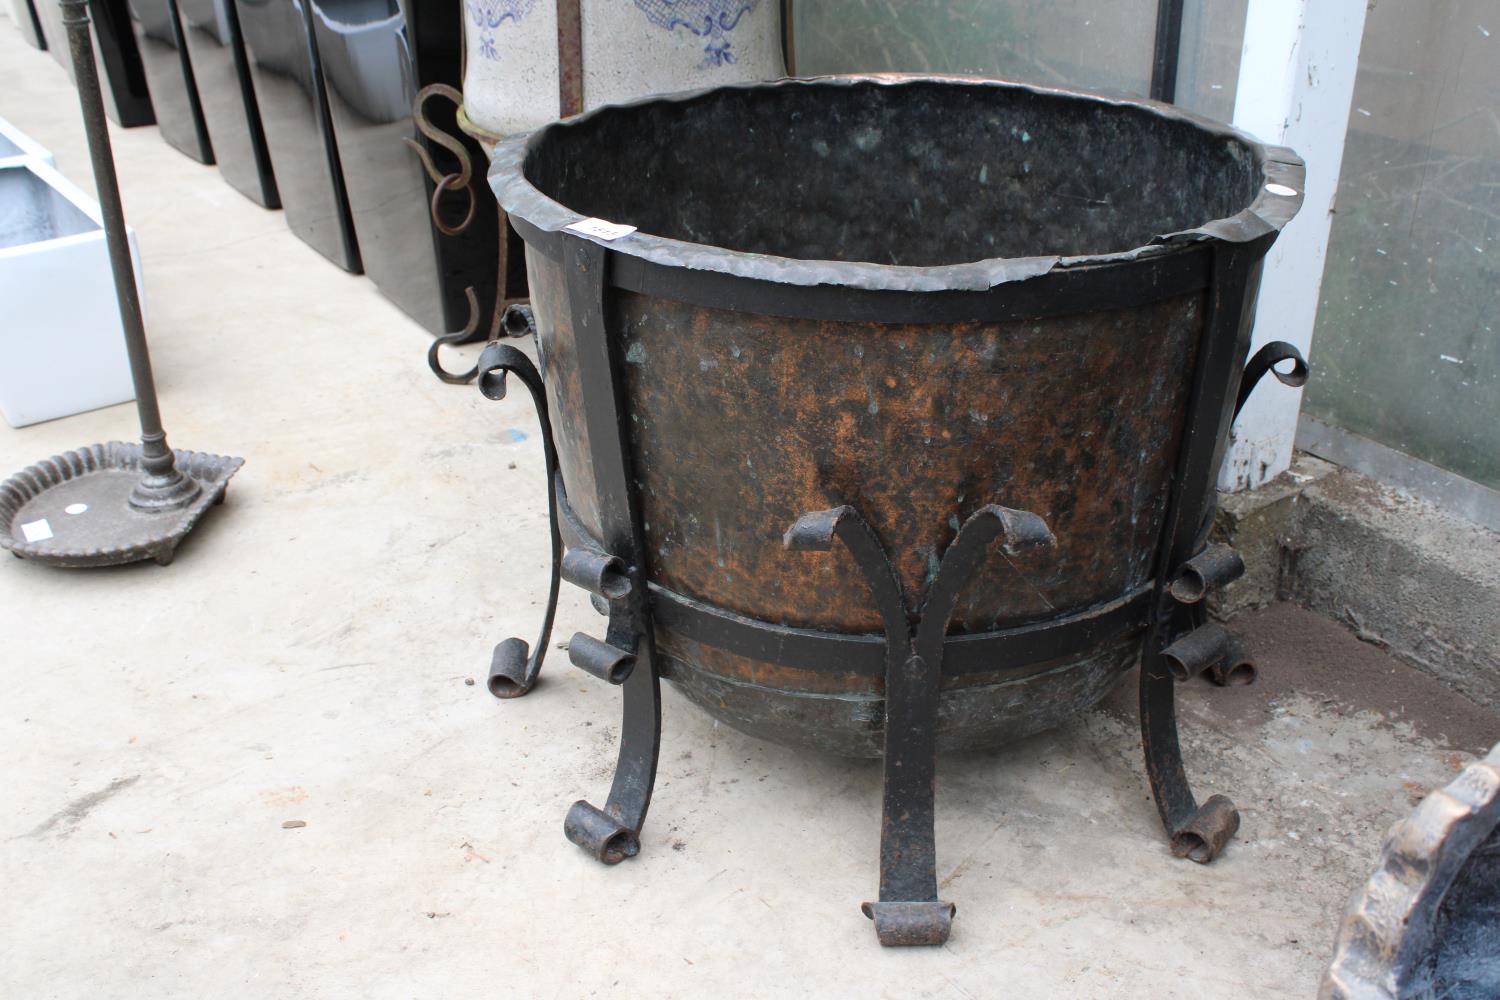 A LARGE VINTAGE AND DECORATIVE COPPER PLANTER WITH WROUGHT IRON STAND (D:53CM) - Image 3 of 3